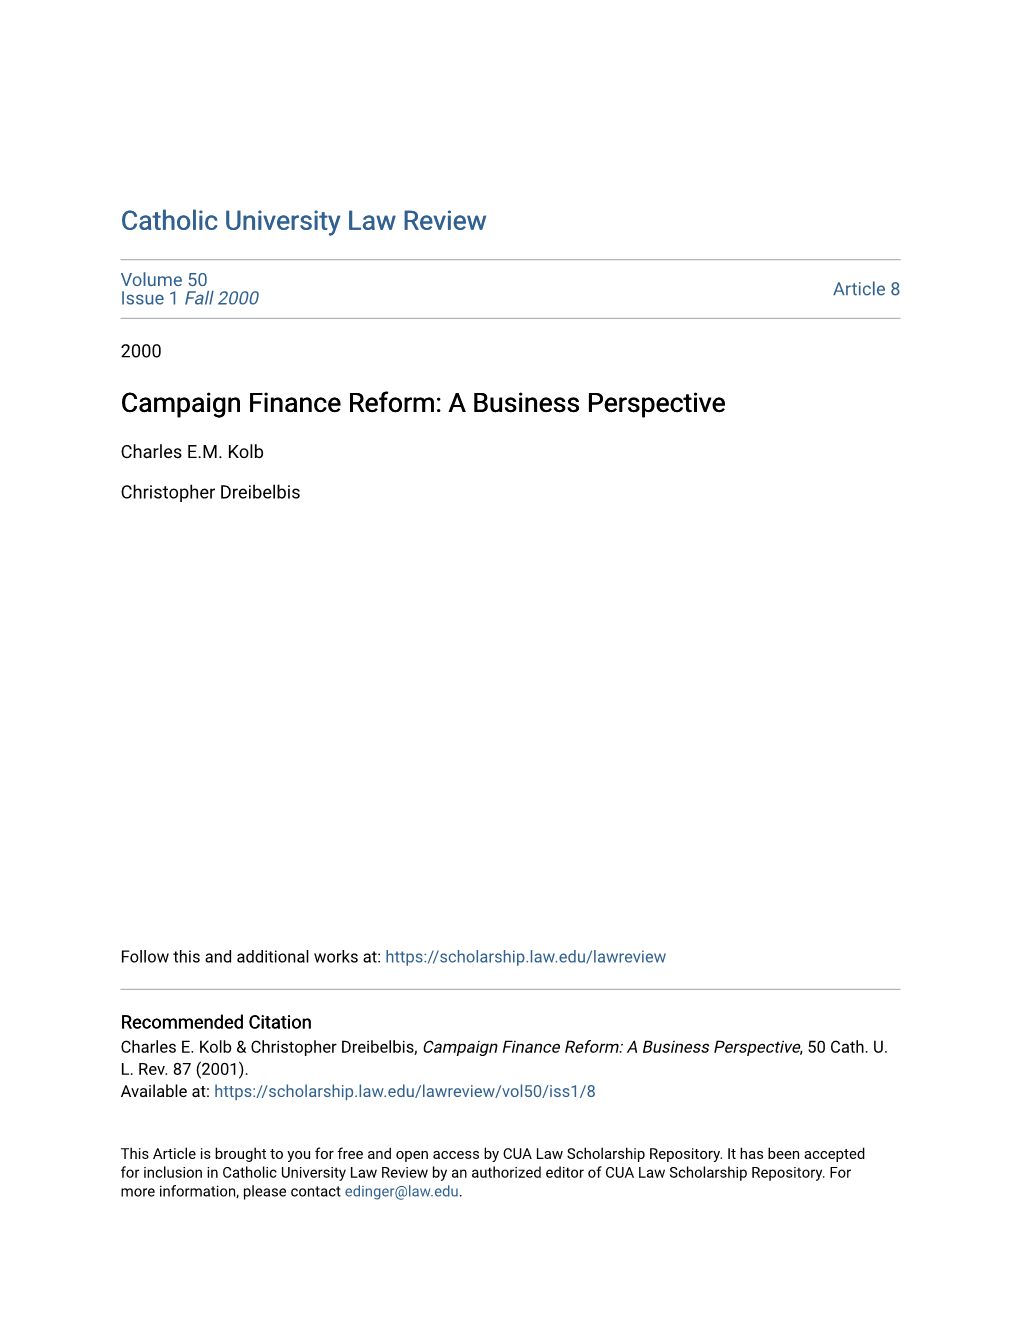 Campaign Finance Reform: a Business Perspective